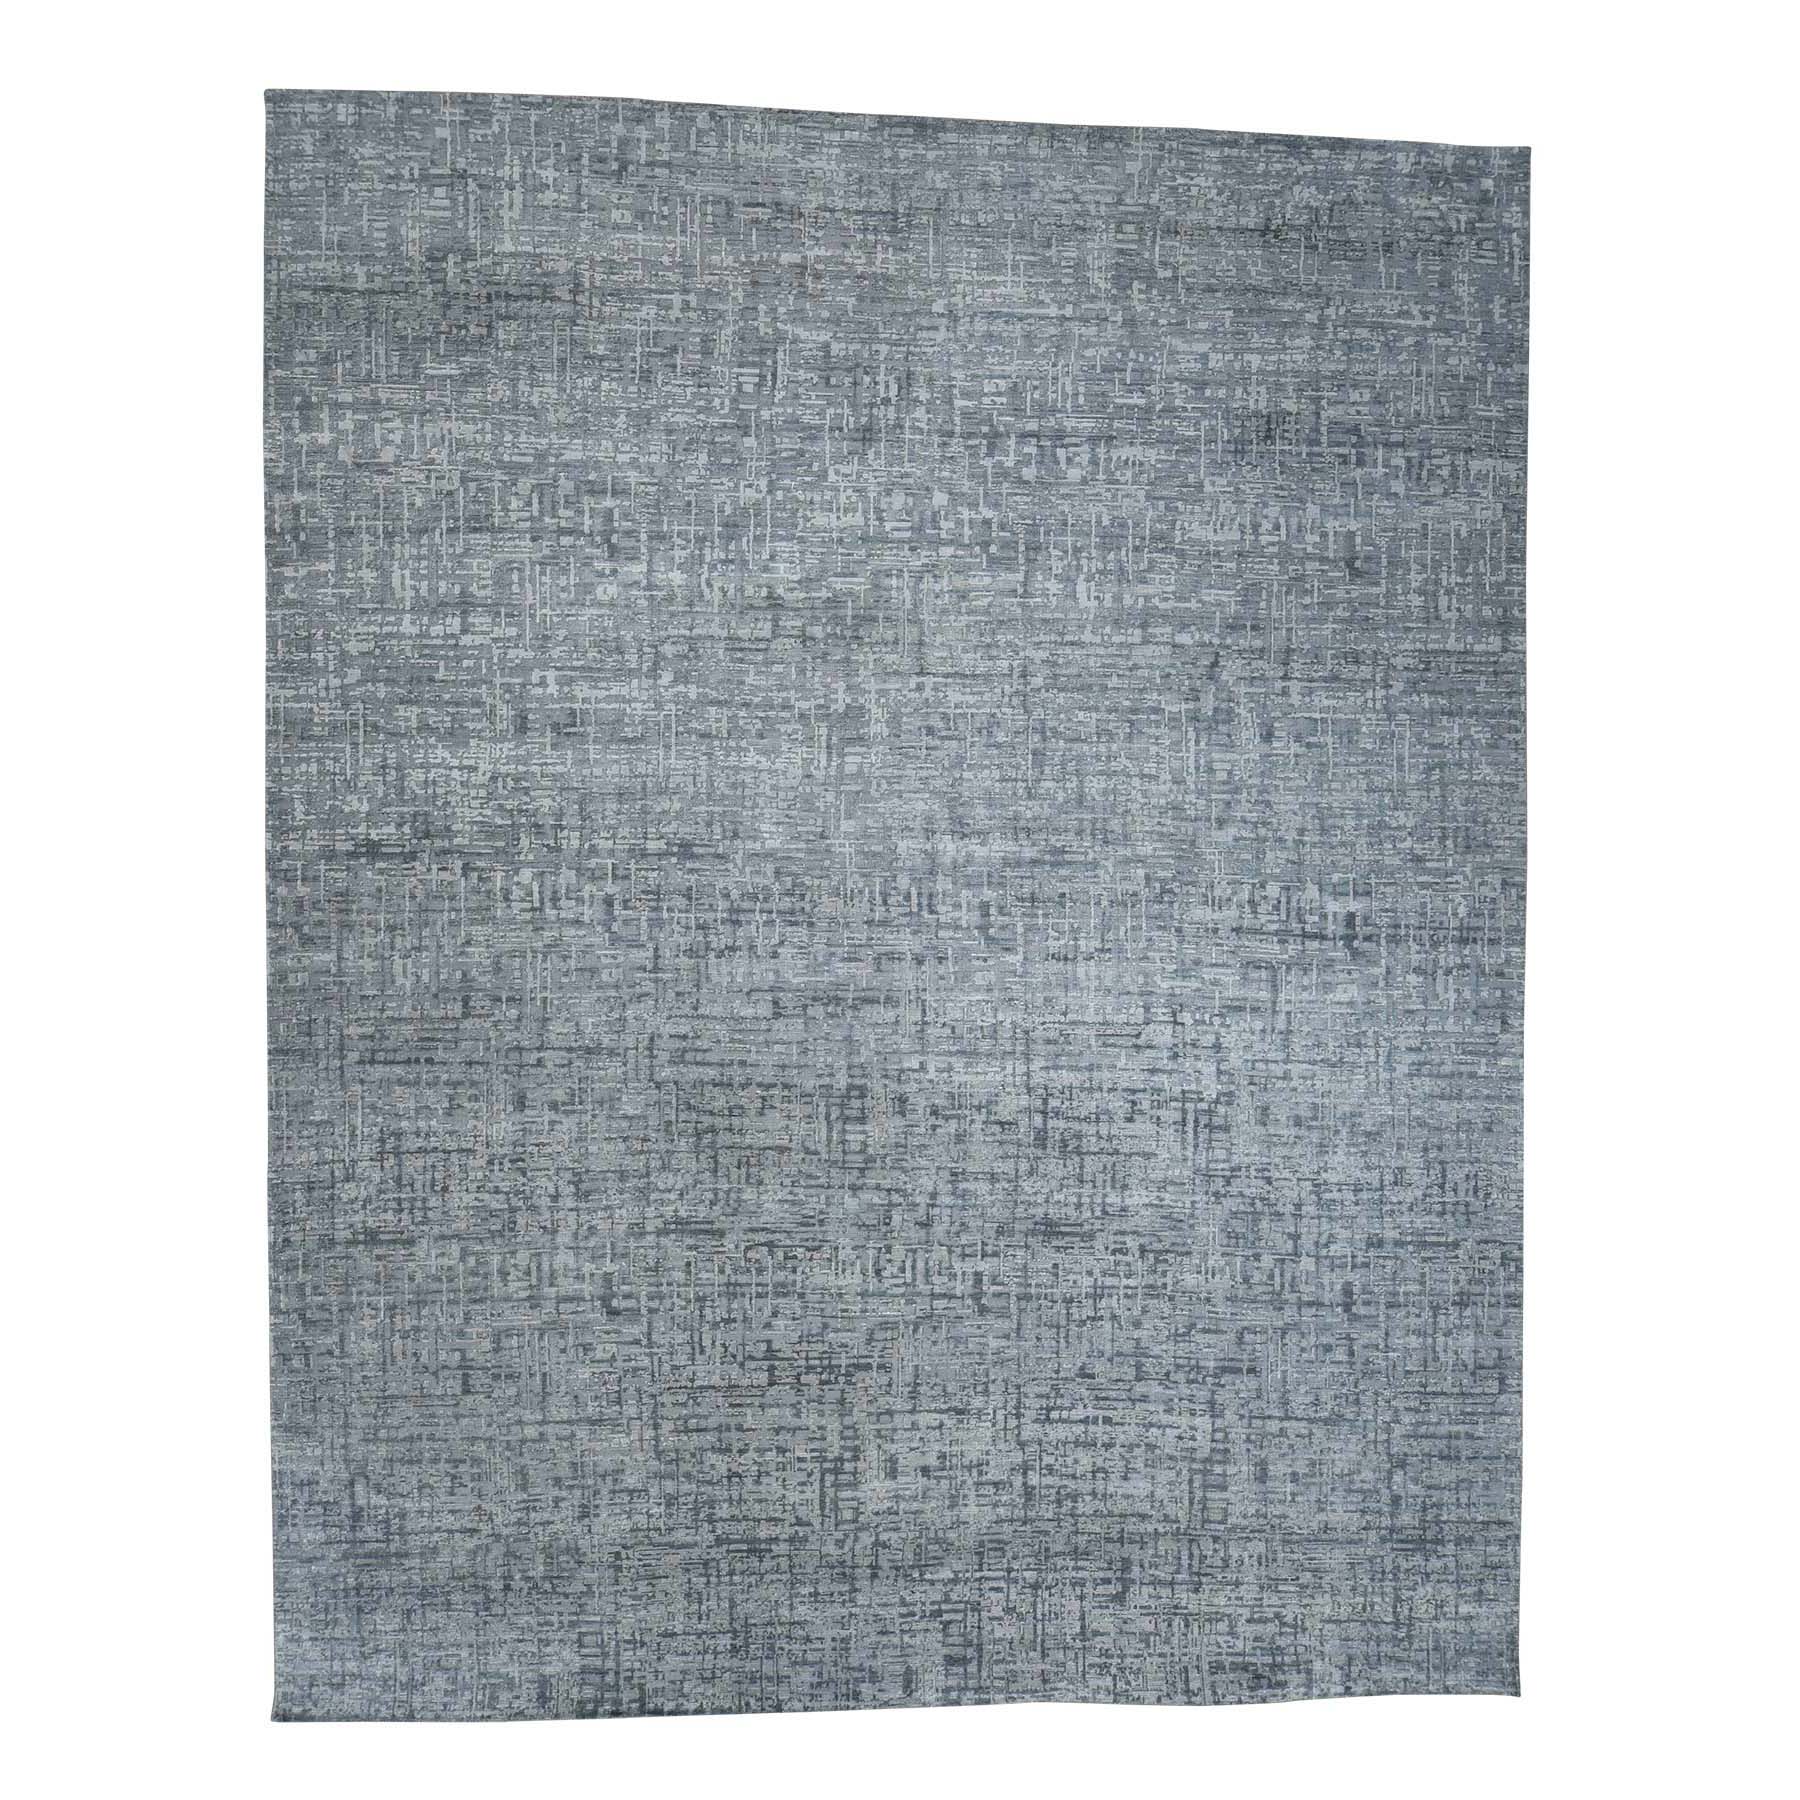 12'1"x15'3" THE MATRIX Pure Silk with Textured Wool Tone on Tone Hand Woven Rug 